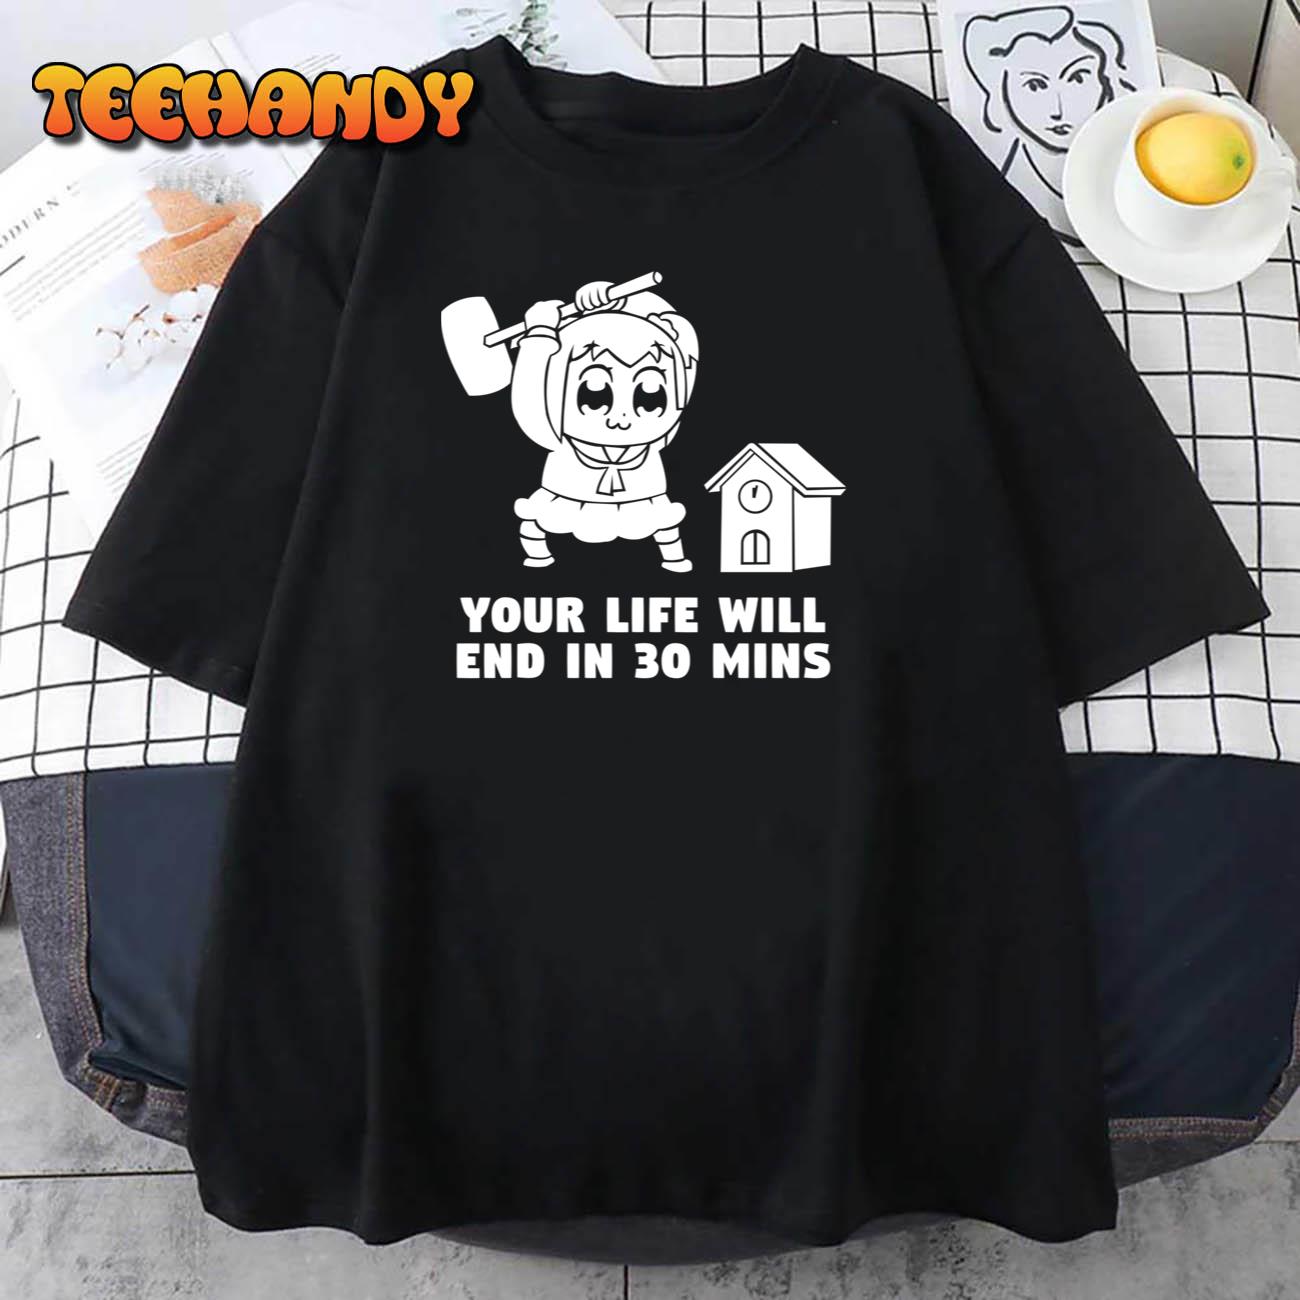 Your Life Will End In 30 Mins Unisex T-Shirt